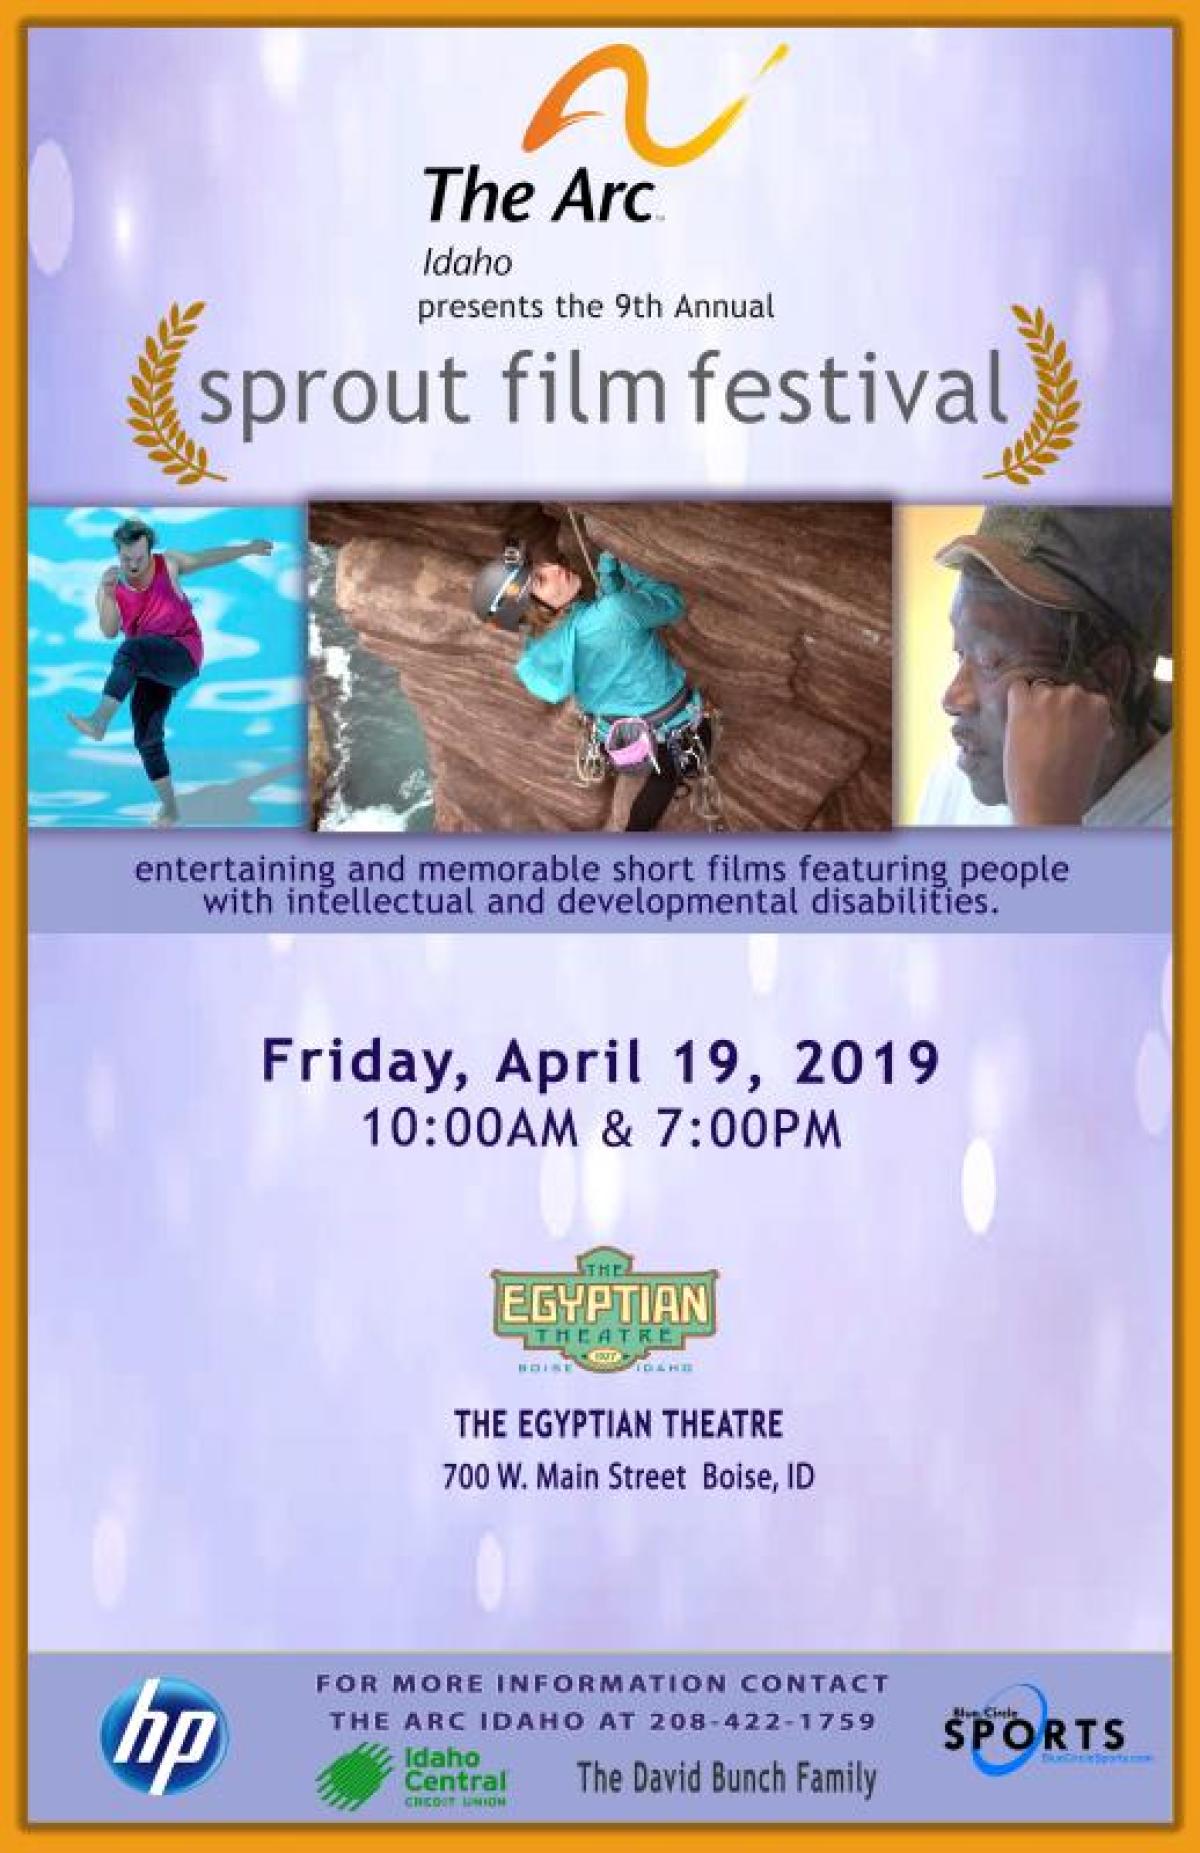 The 9th Annual Sprout Film Festival